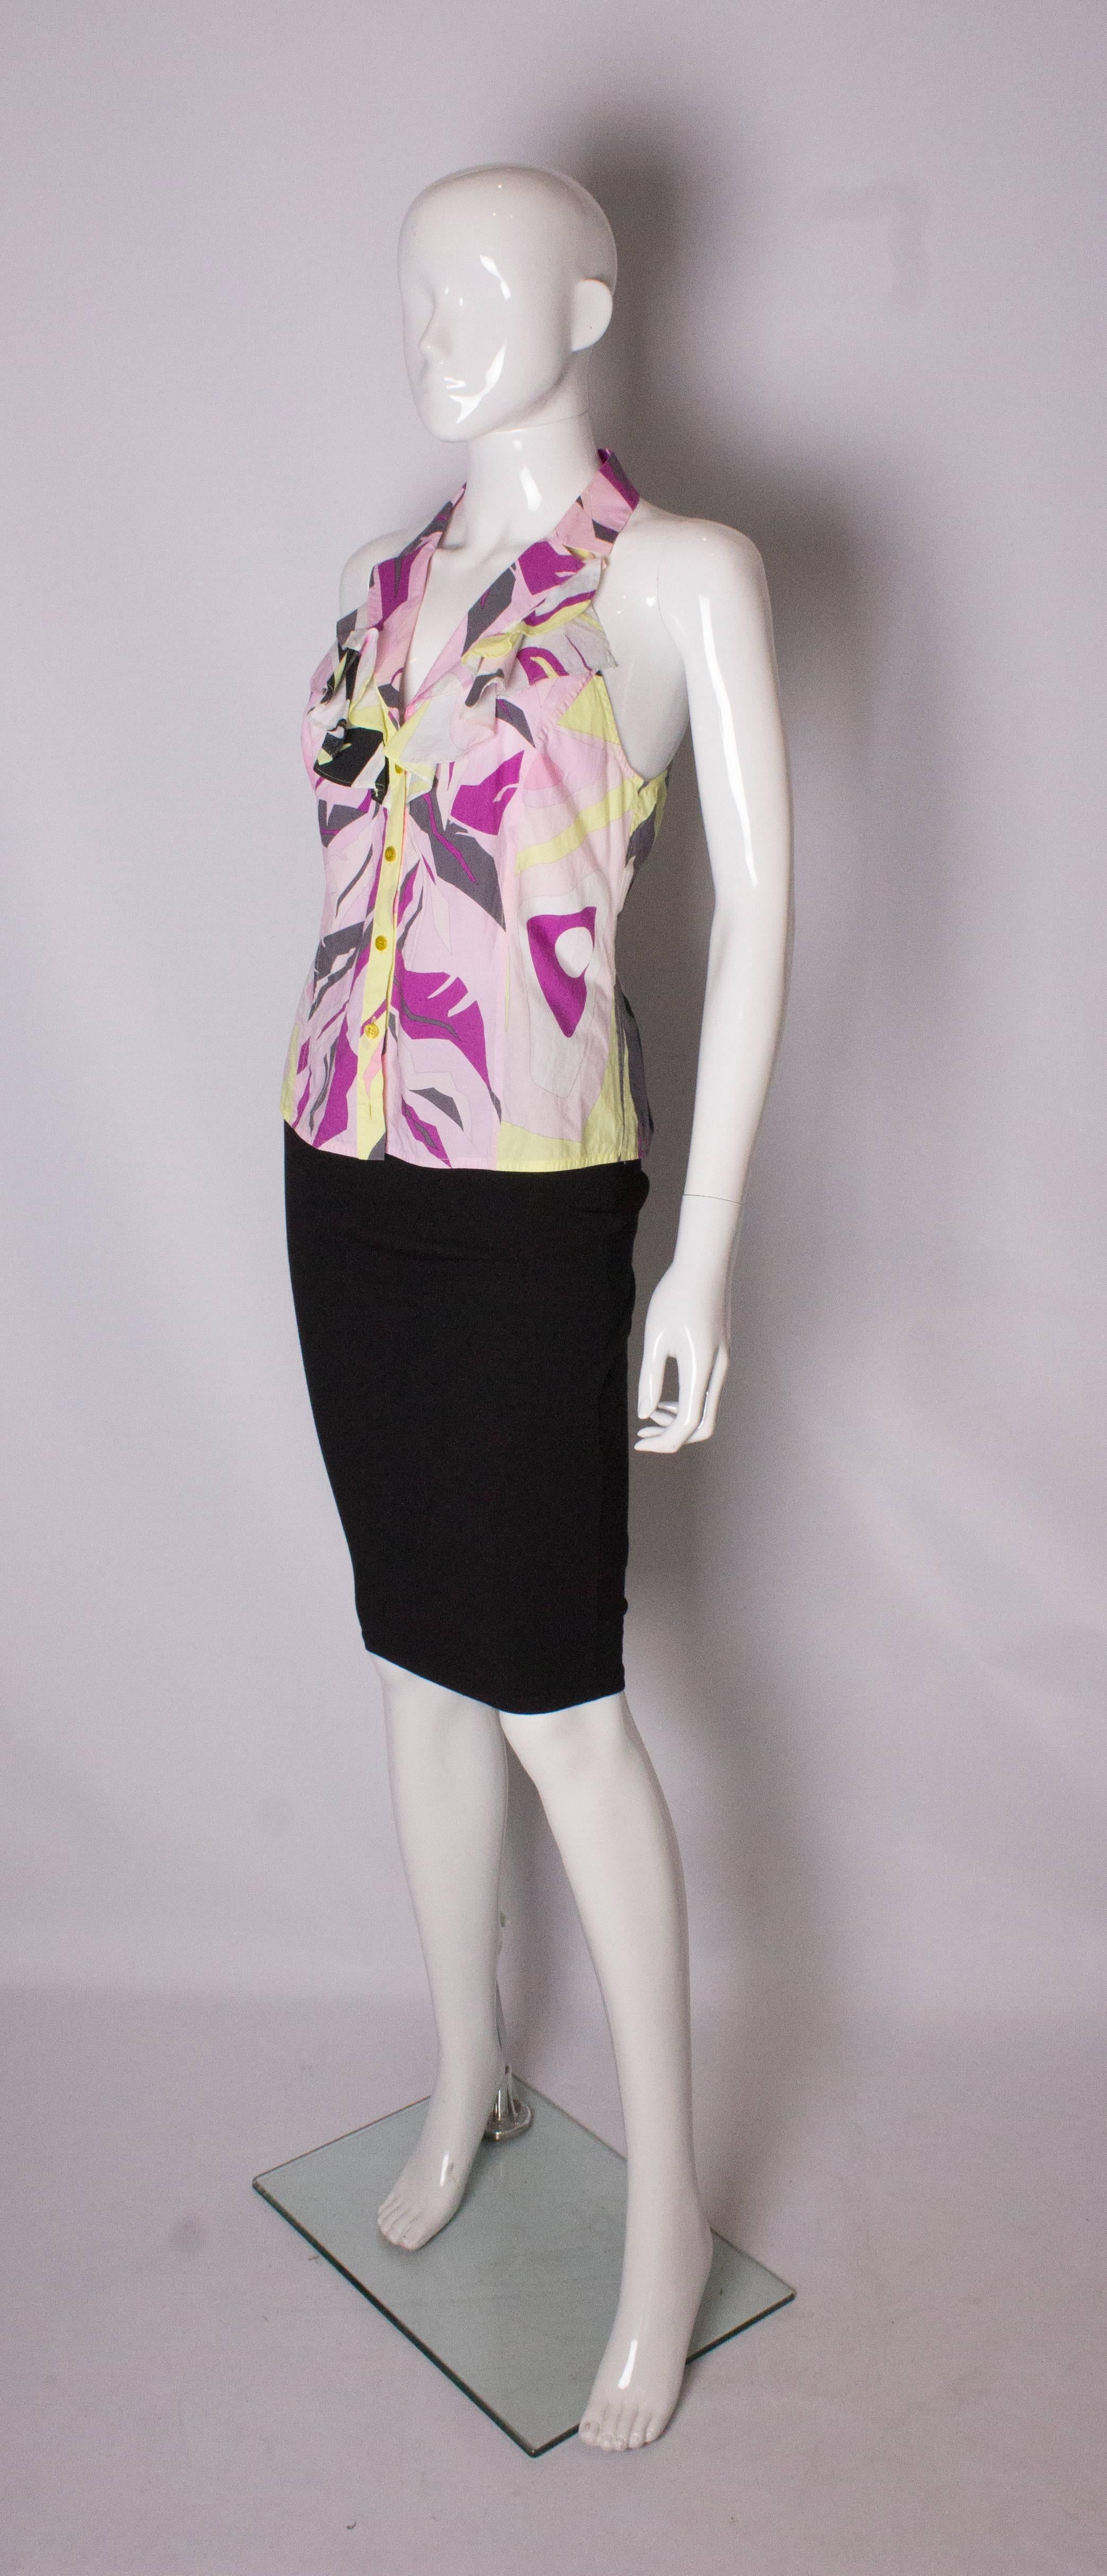 Pucci Cotton Top In Good Condition For Sale In London, GB